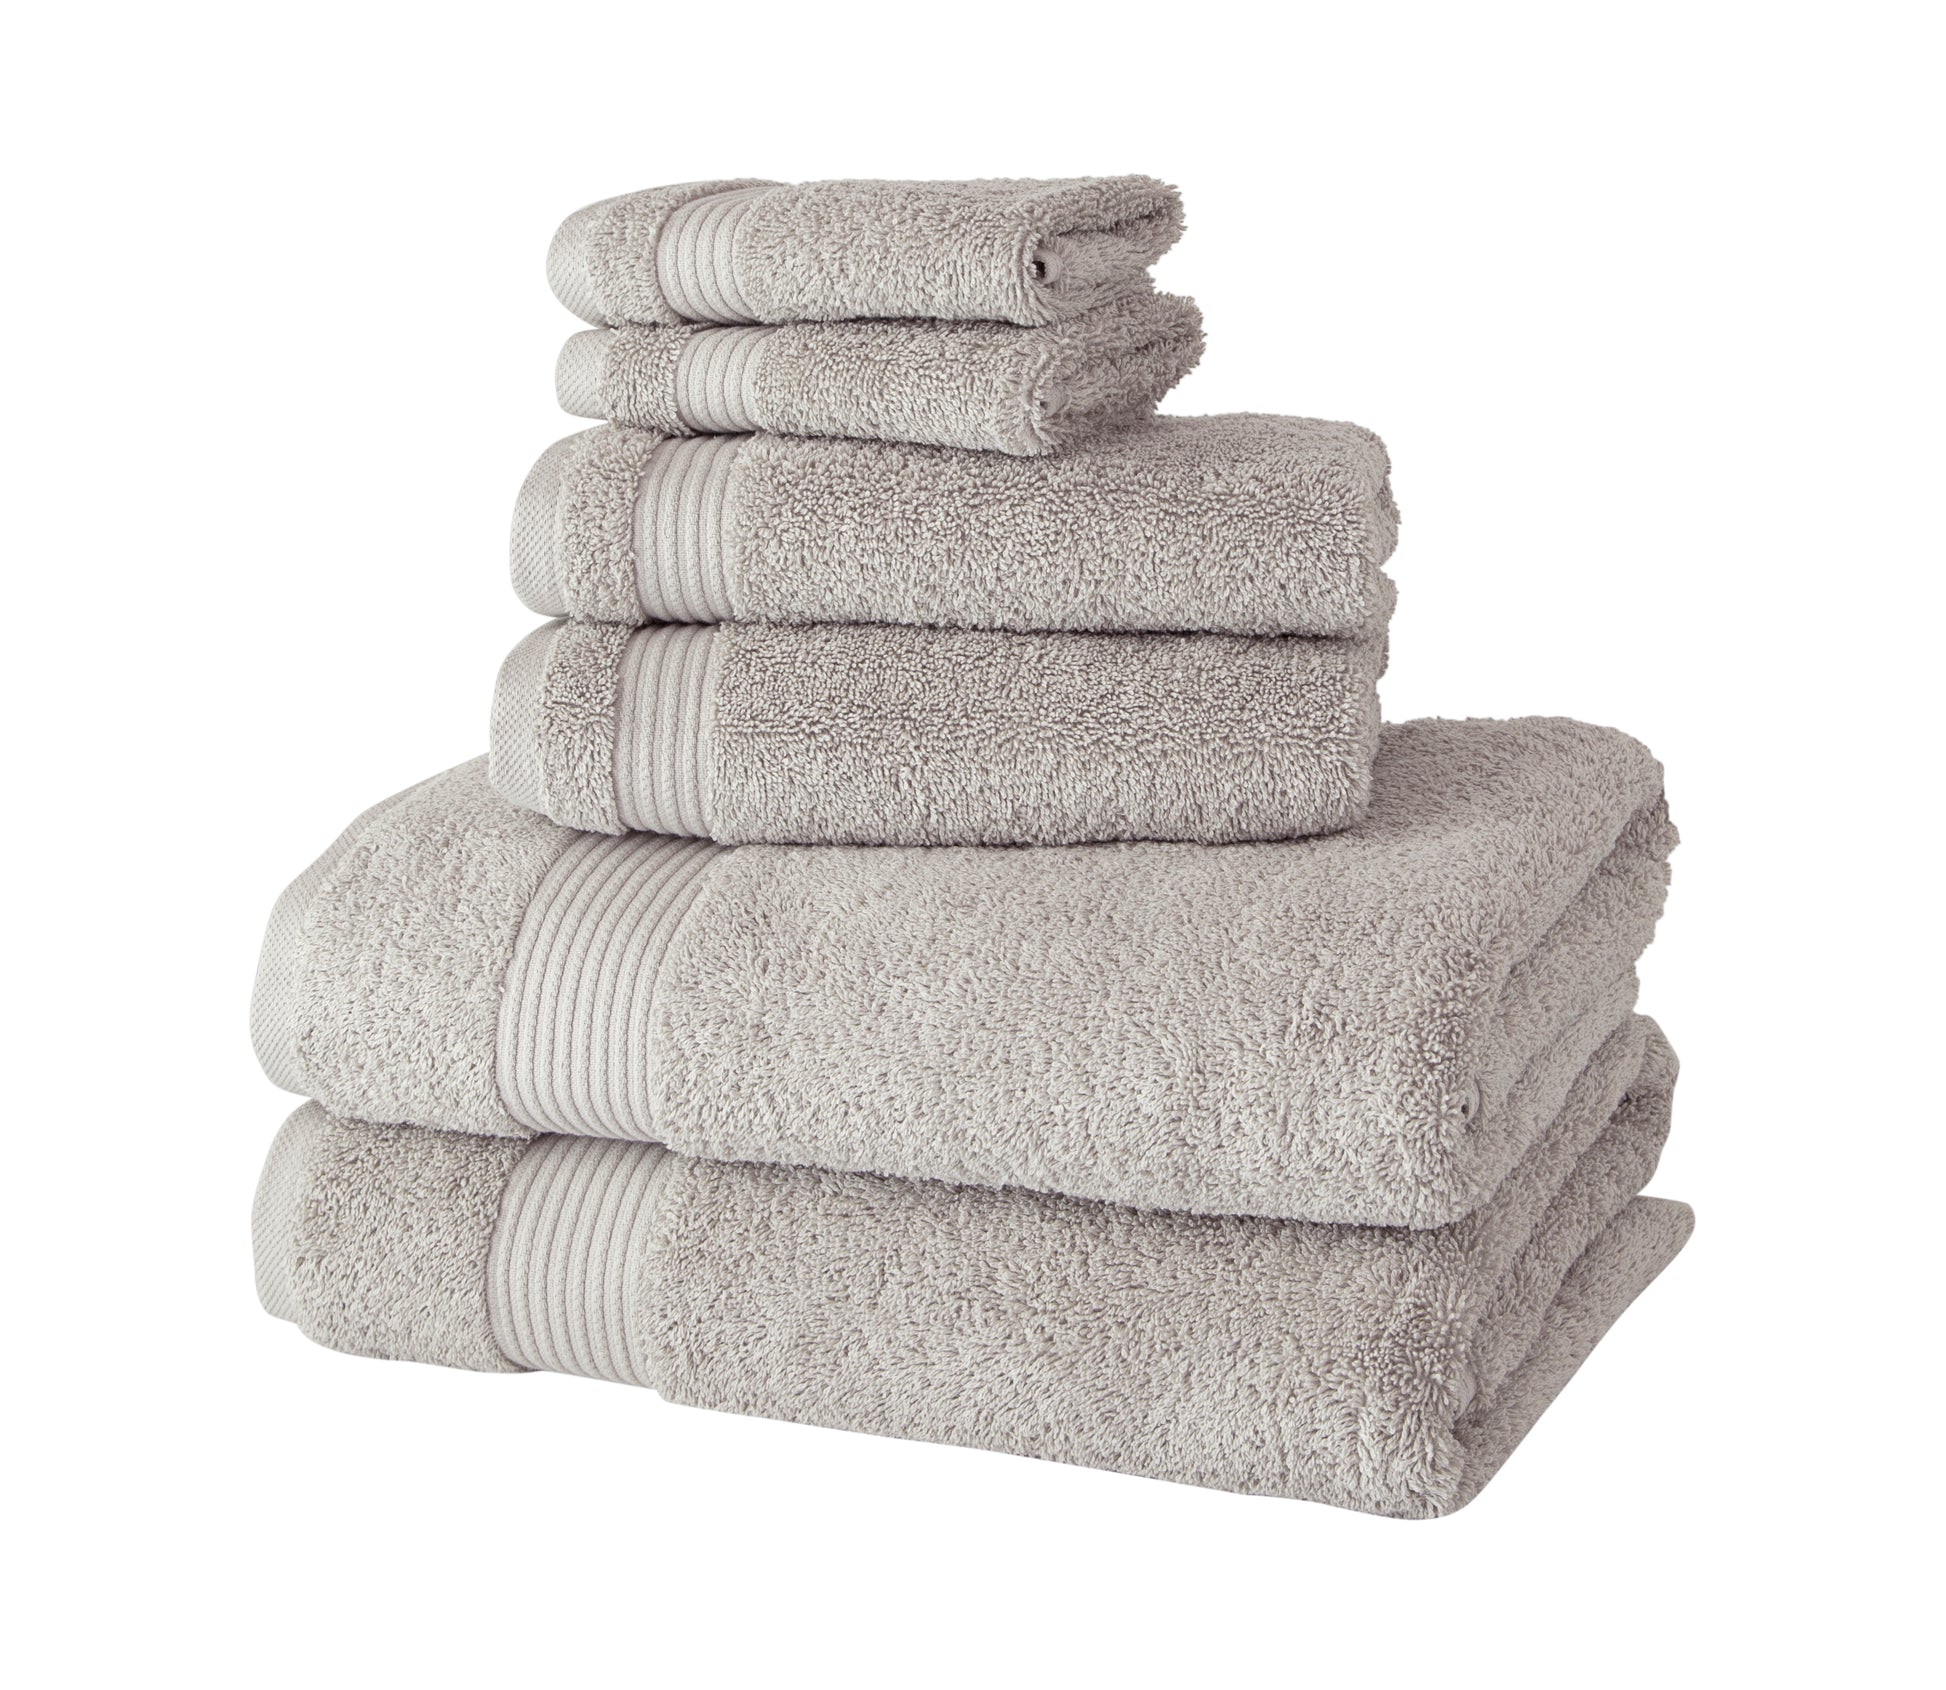 Classic Turkish Towels Royal Turkish Towels Villa Collection Hand Towel Pack of 6 Ivory, Size: 16 x 30, Beige